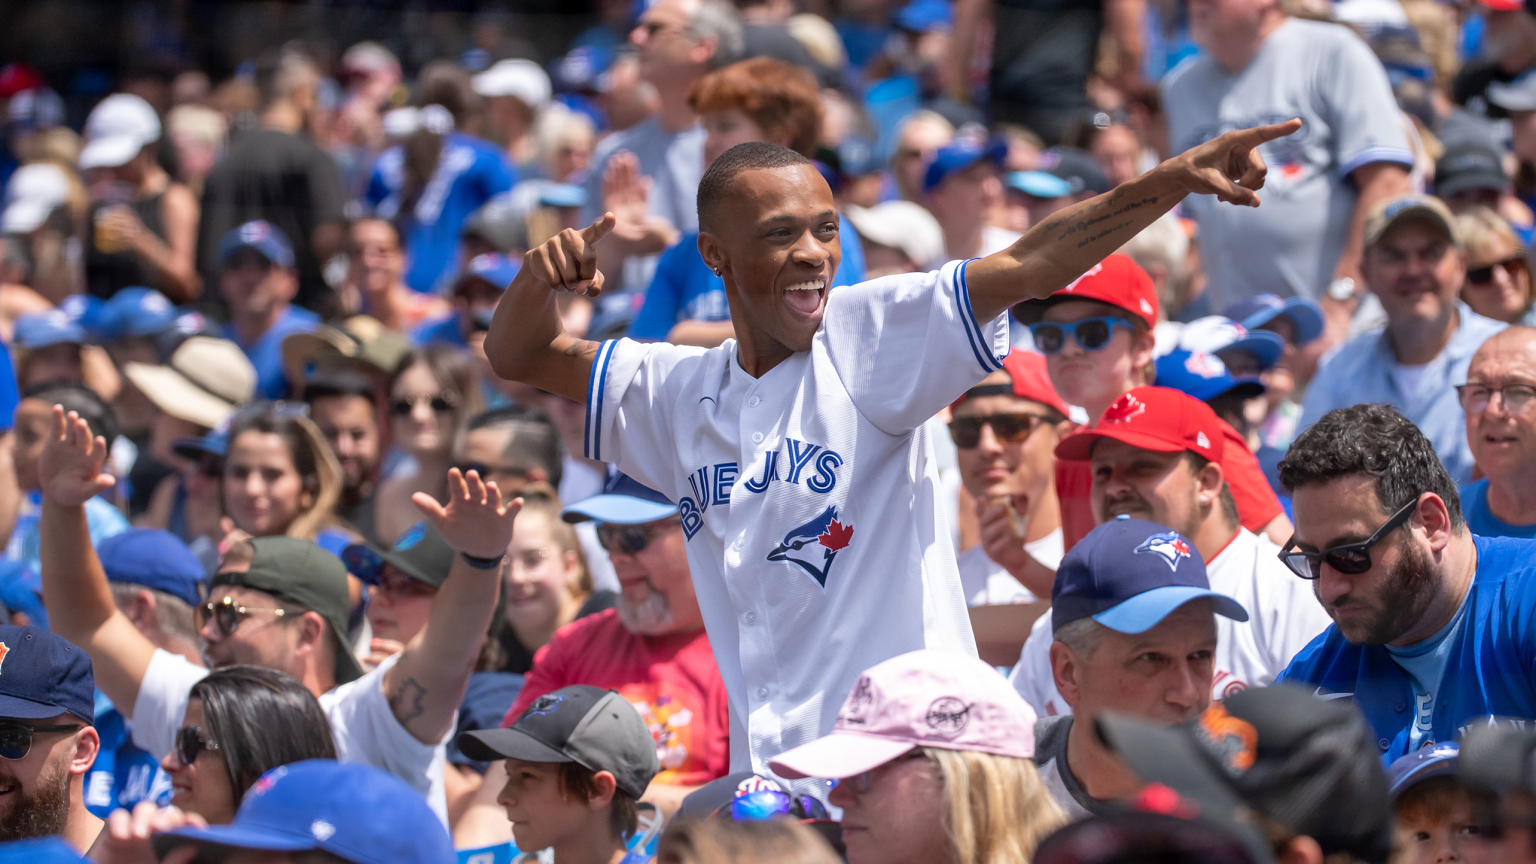 The Best Blue Jays Merch to Cheer the Team on in this Season